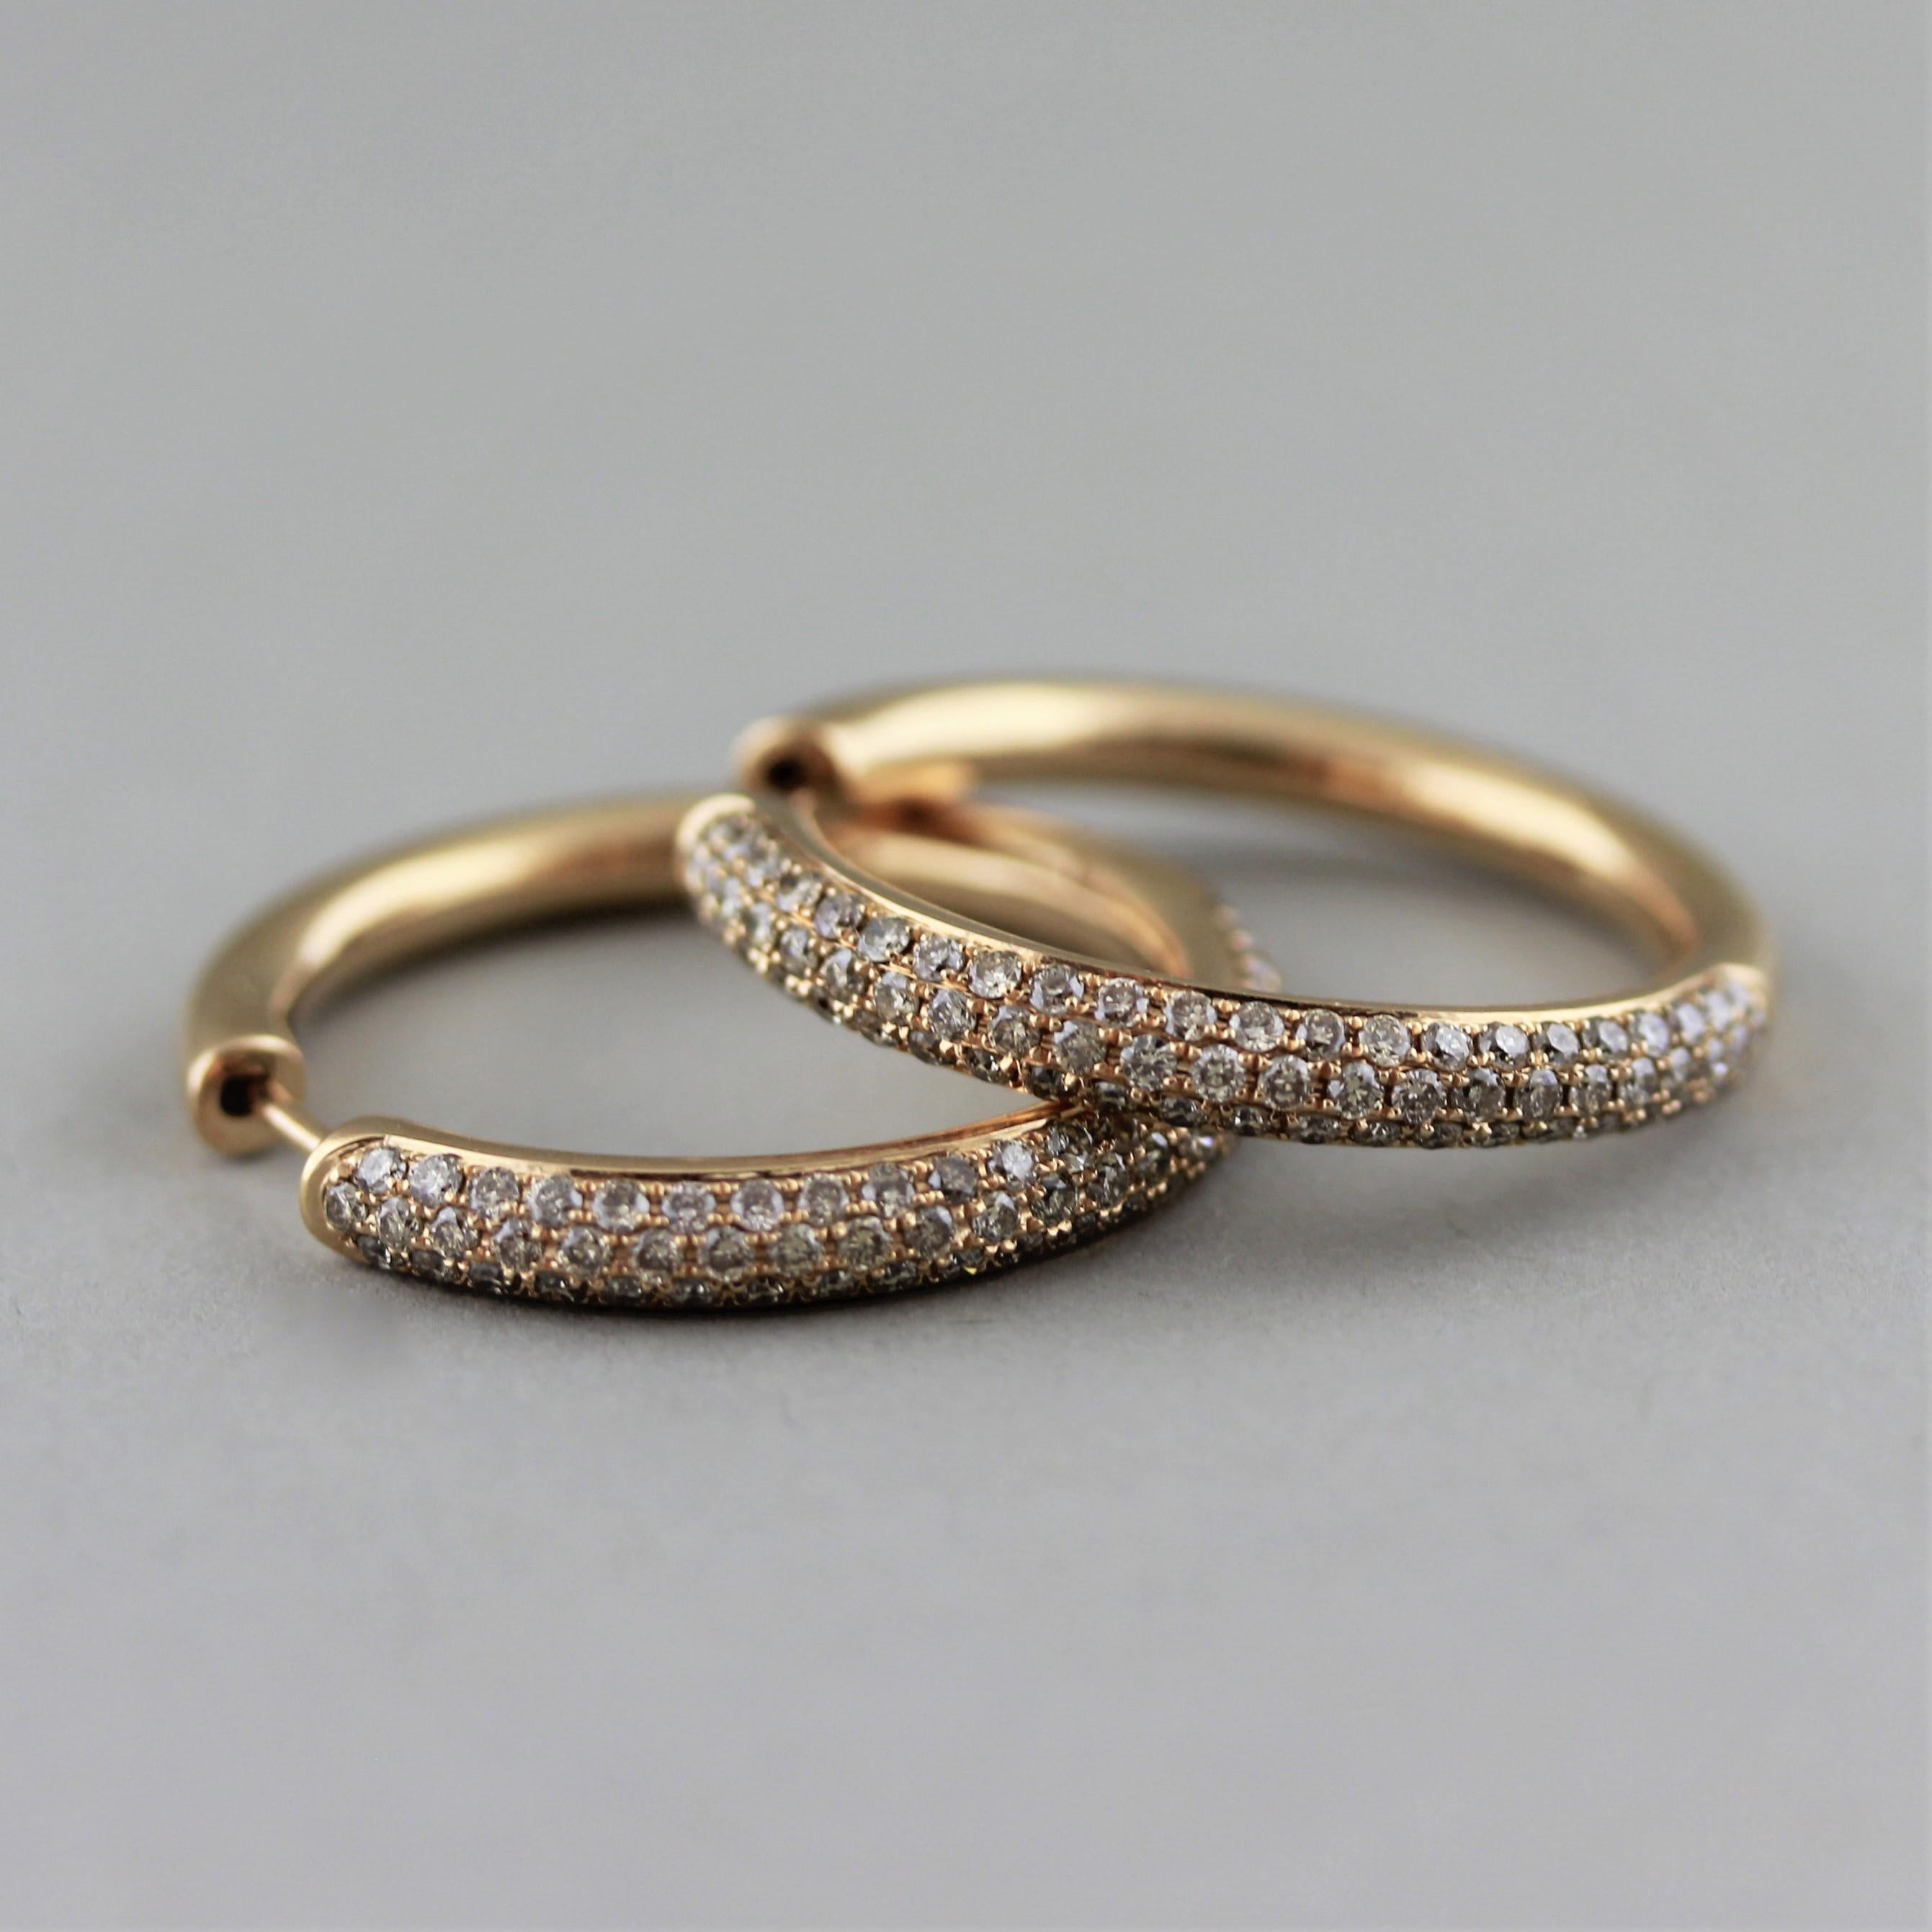 A modern take on the classic hoop earrings! These hoops feature 1.47 carats of fancy colored diamonds pavé set in 18k rose gold. Earrings that can be worn everyday. 


Length: 1 inch
